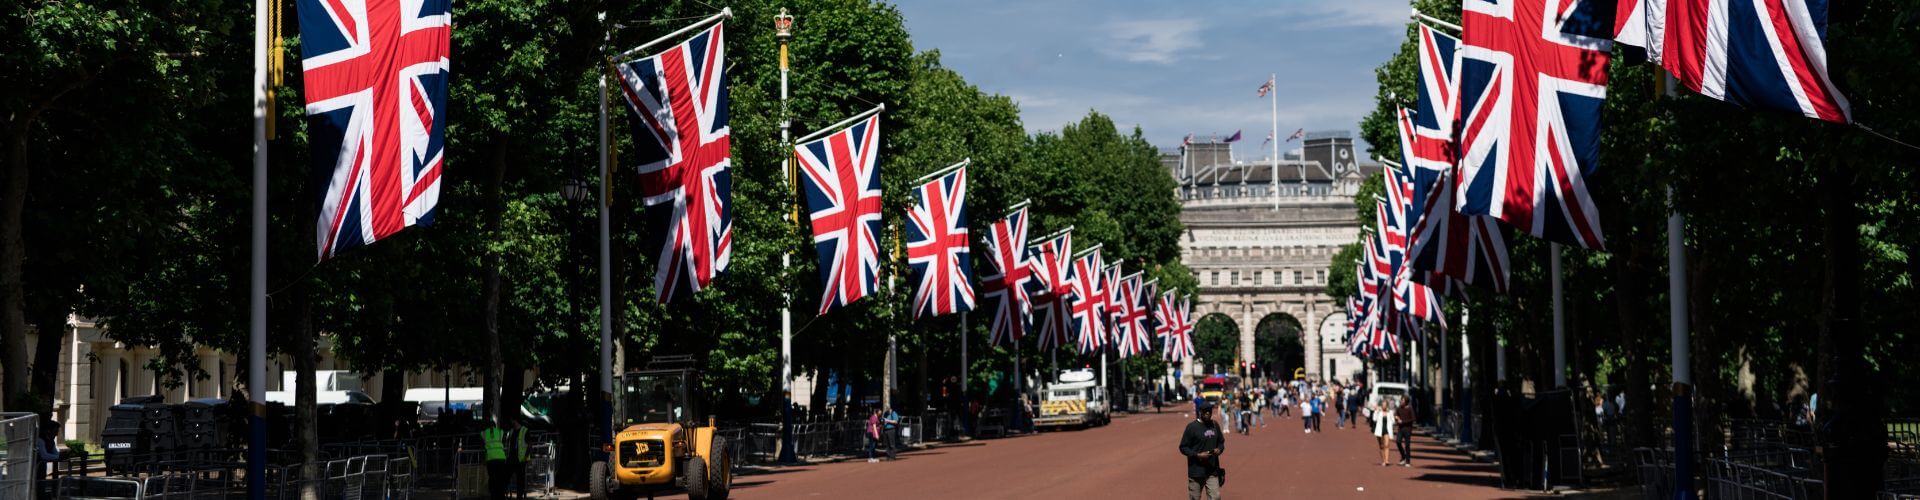 pall mall flags